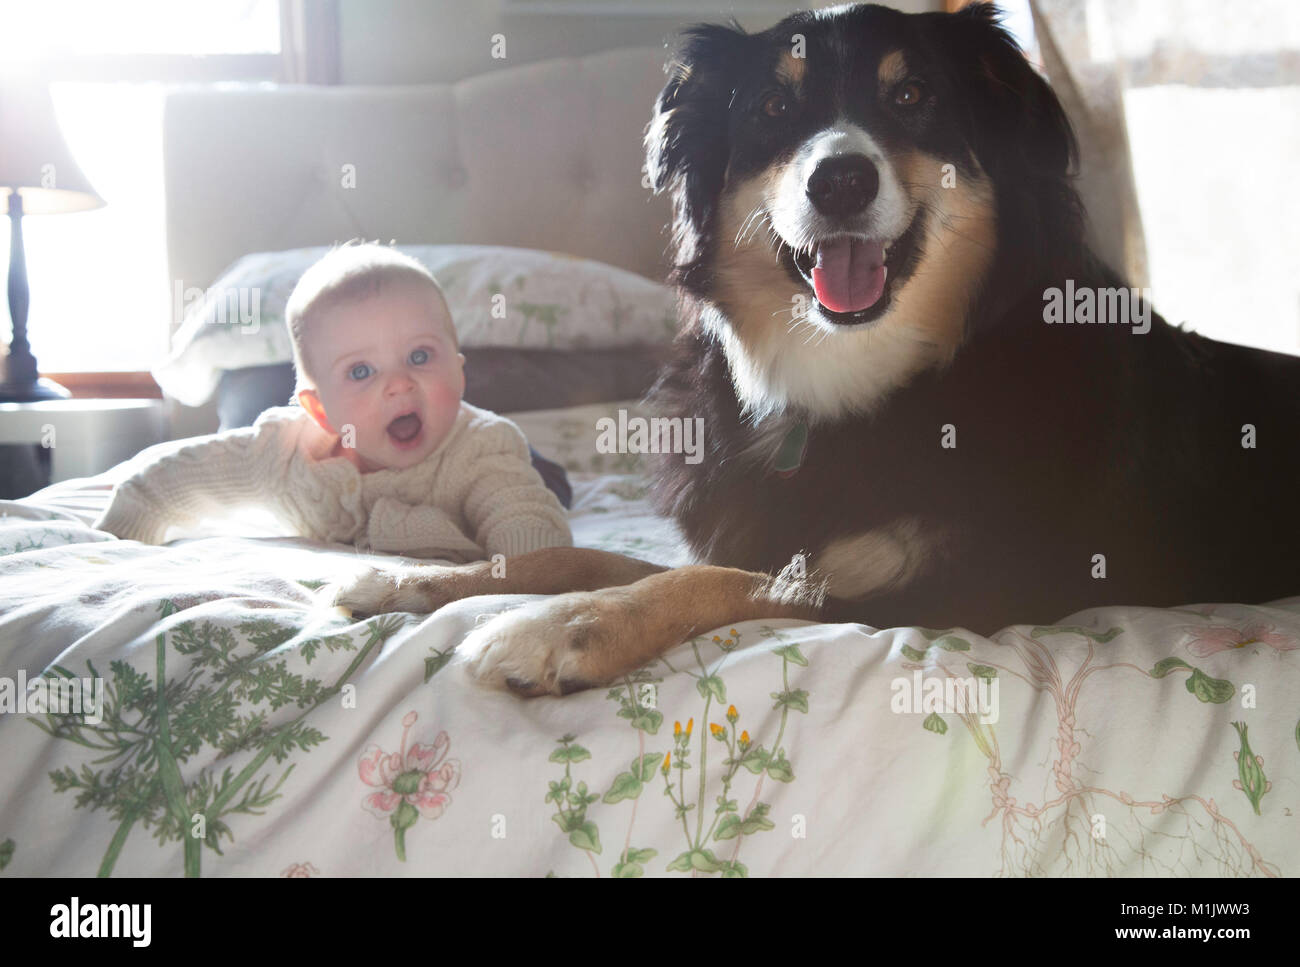 Baby and Dog on Bed Stock Photo